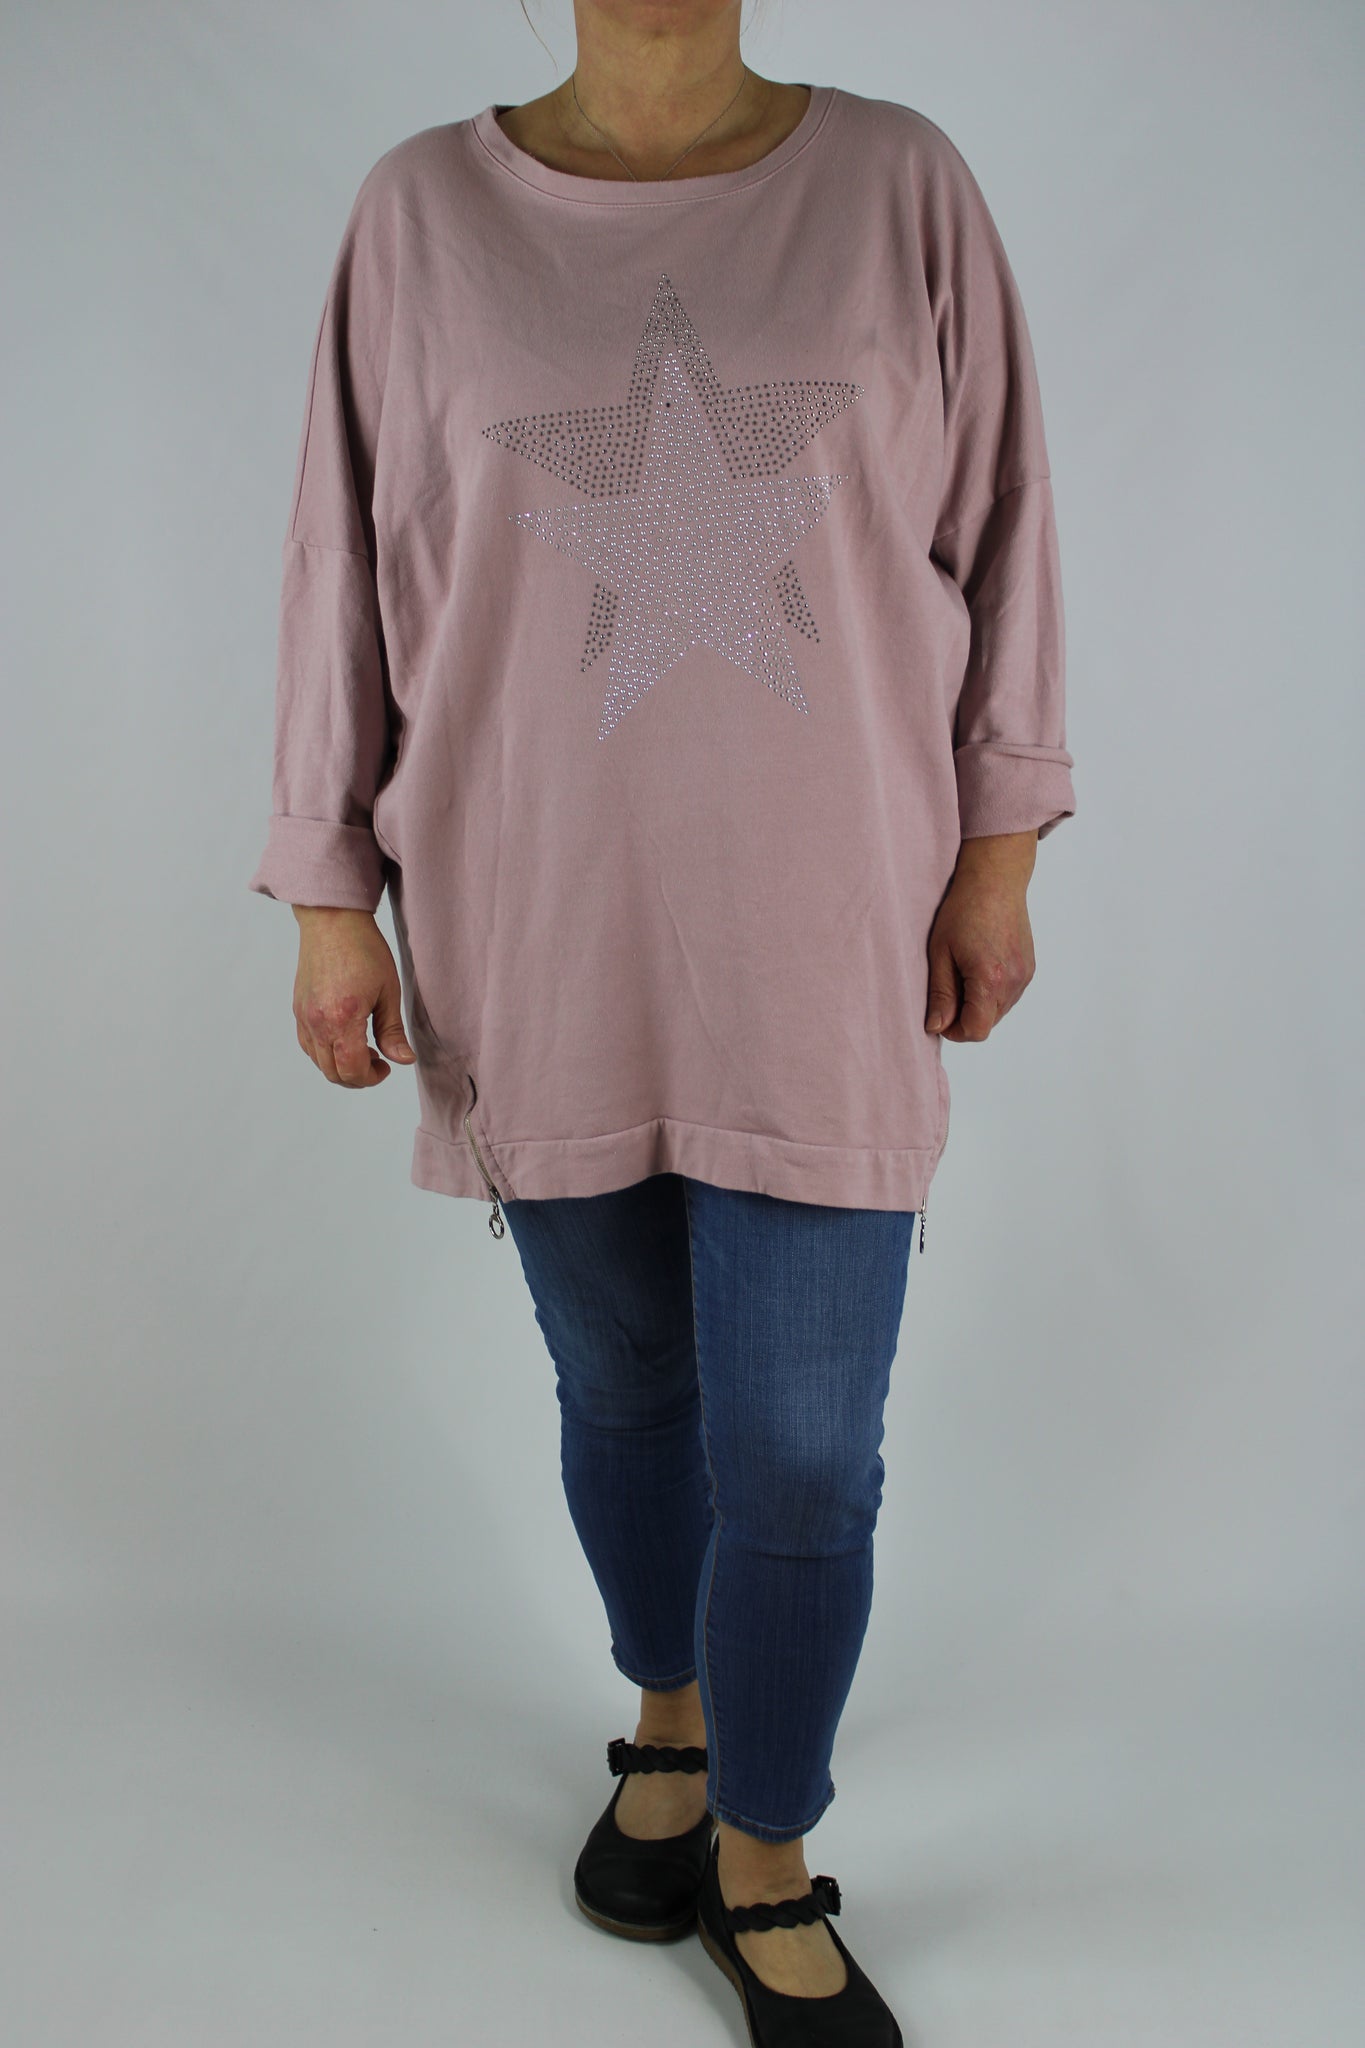 Made in Italy Cotton Sweatshirt Studded Star Tunic Size 12 14 16 18 20 in Light Pink